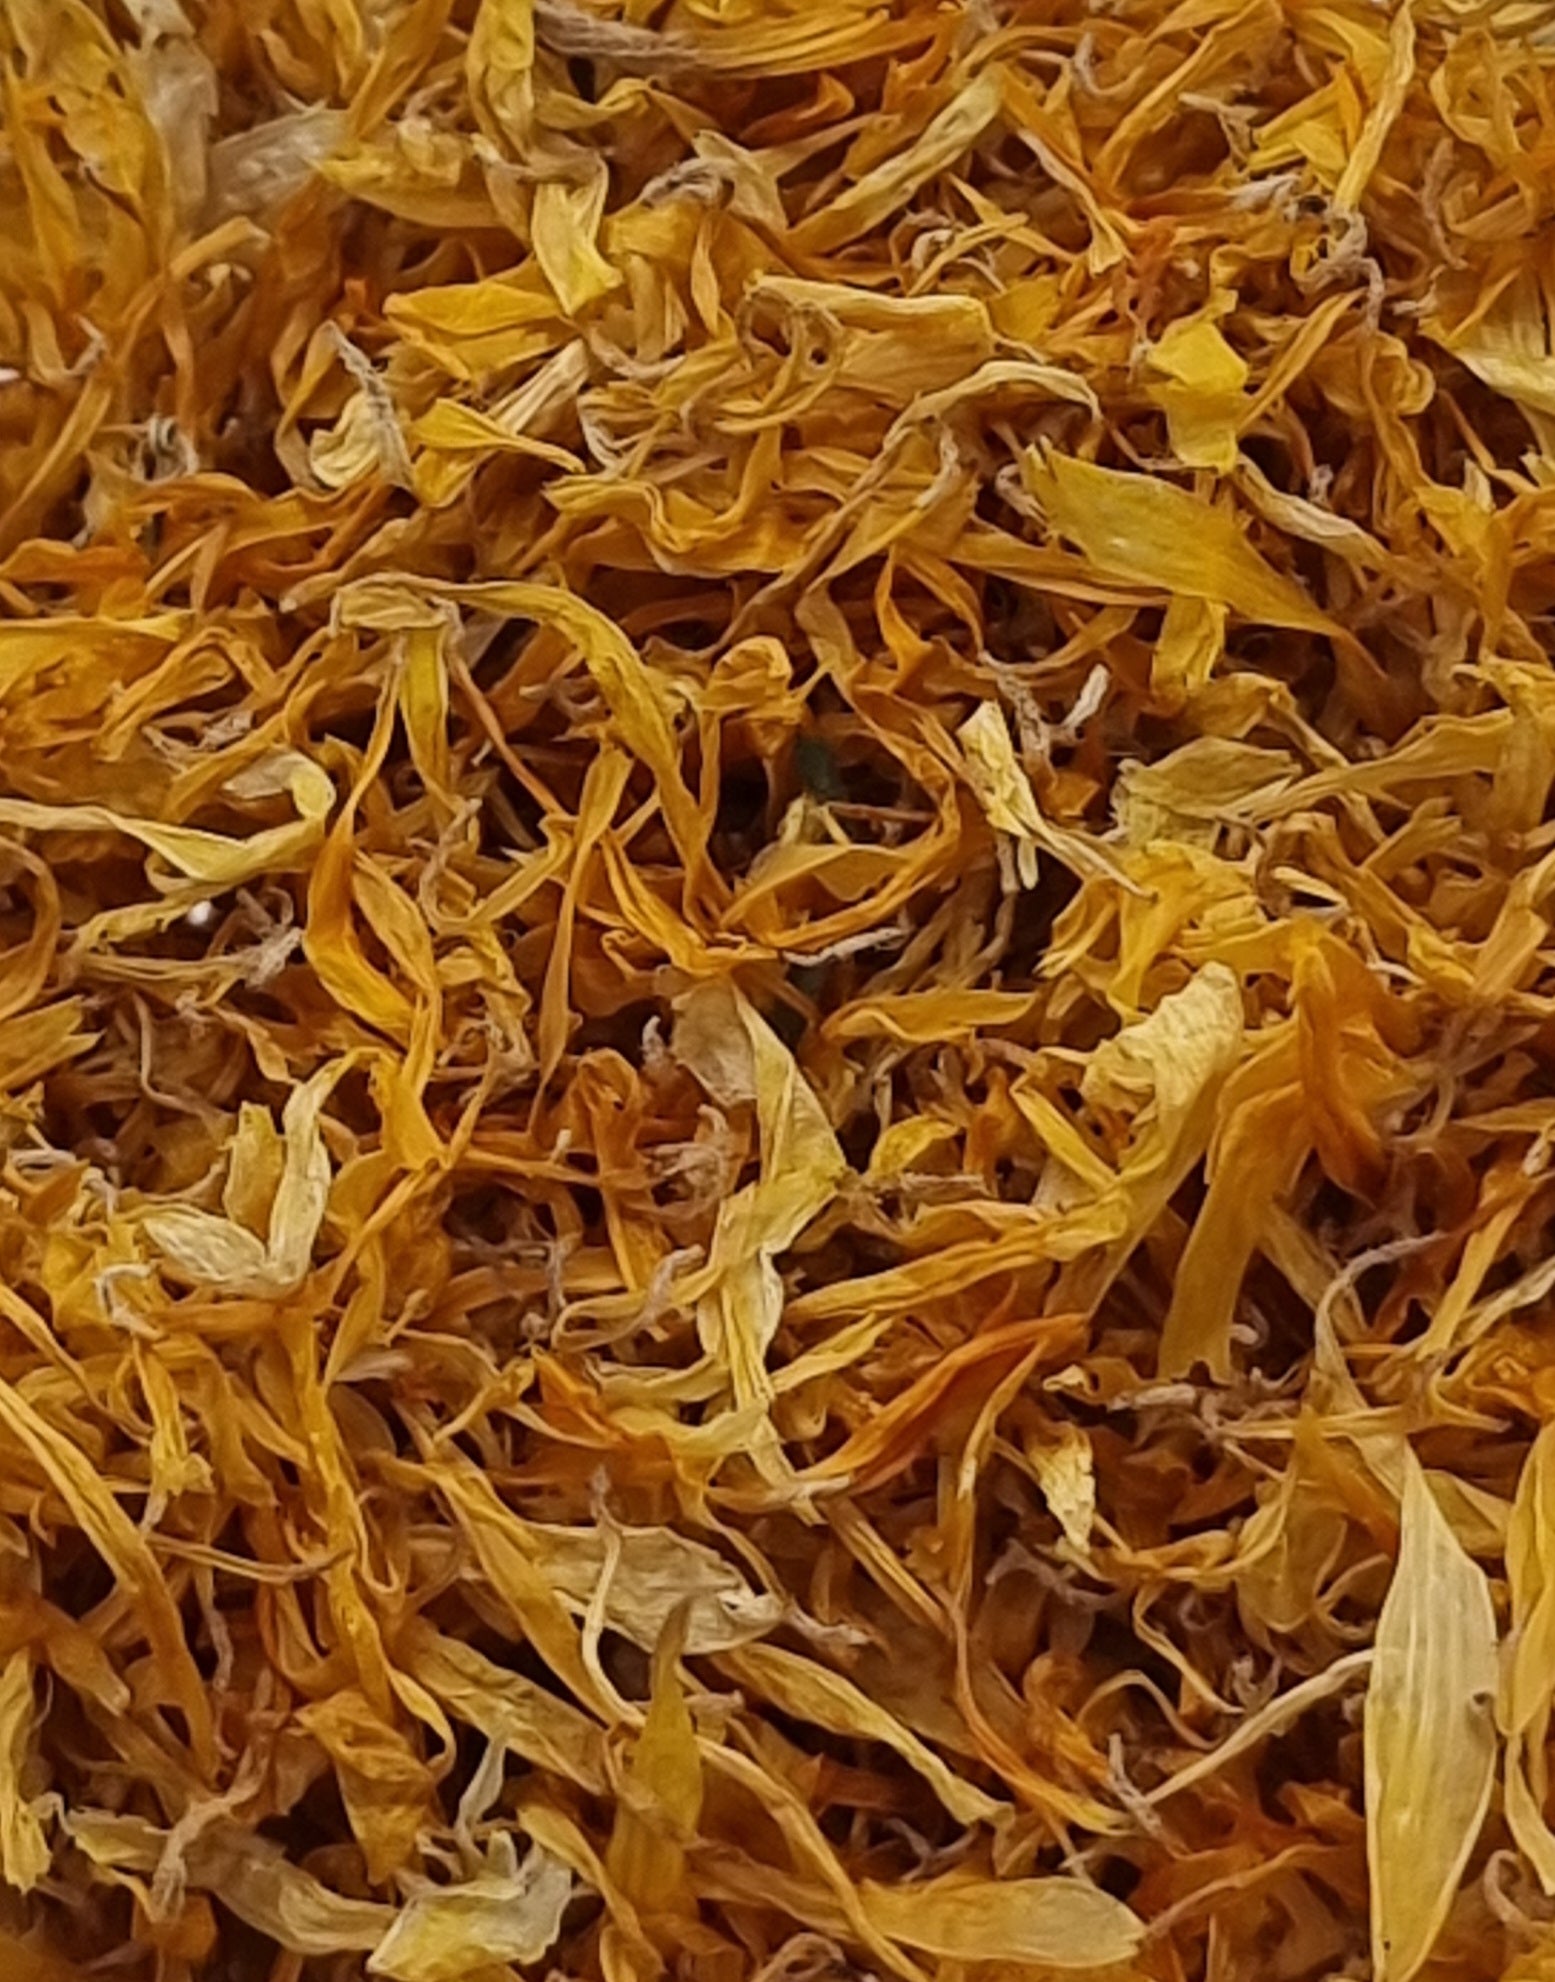 close up photo of dried calendula petals showing the variety of yellow to orange colours. The petals are small, similar sizes and variations of elongated oval shapes with slight curls at the edges